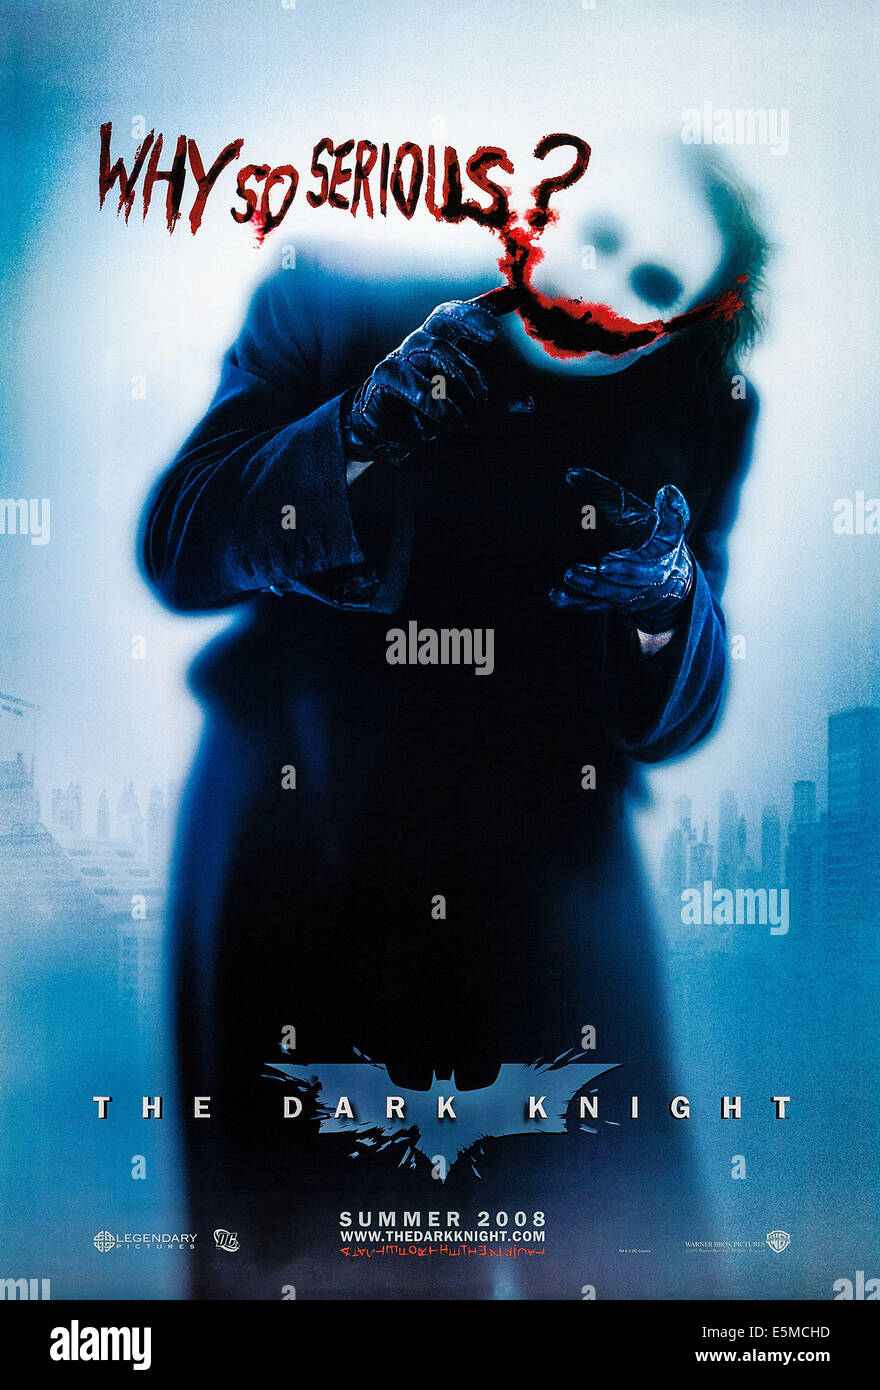 THE DARK KNIGHT, Heath Ledger on US advance poster art, 2008, ©Warner Bros. Pictures/courtesy Everett Collection Stock Photo